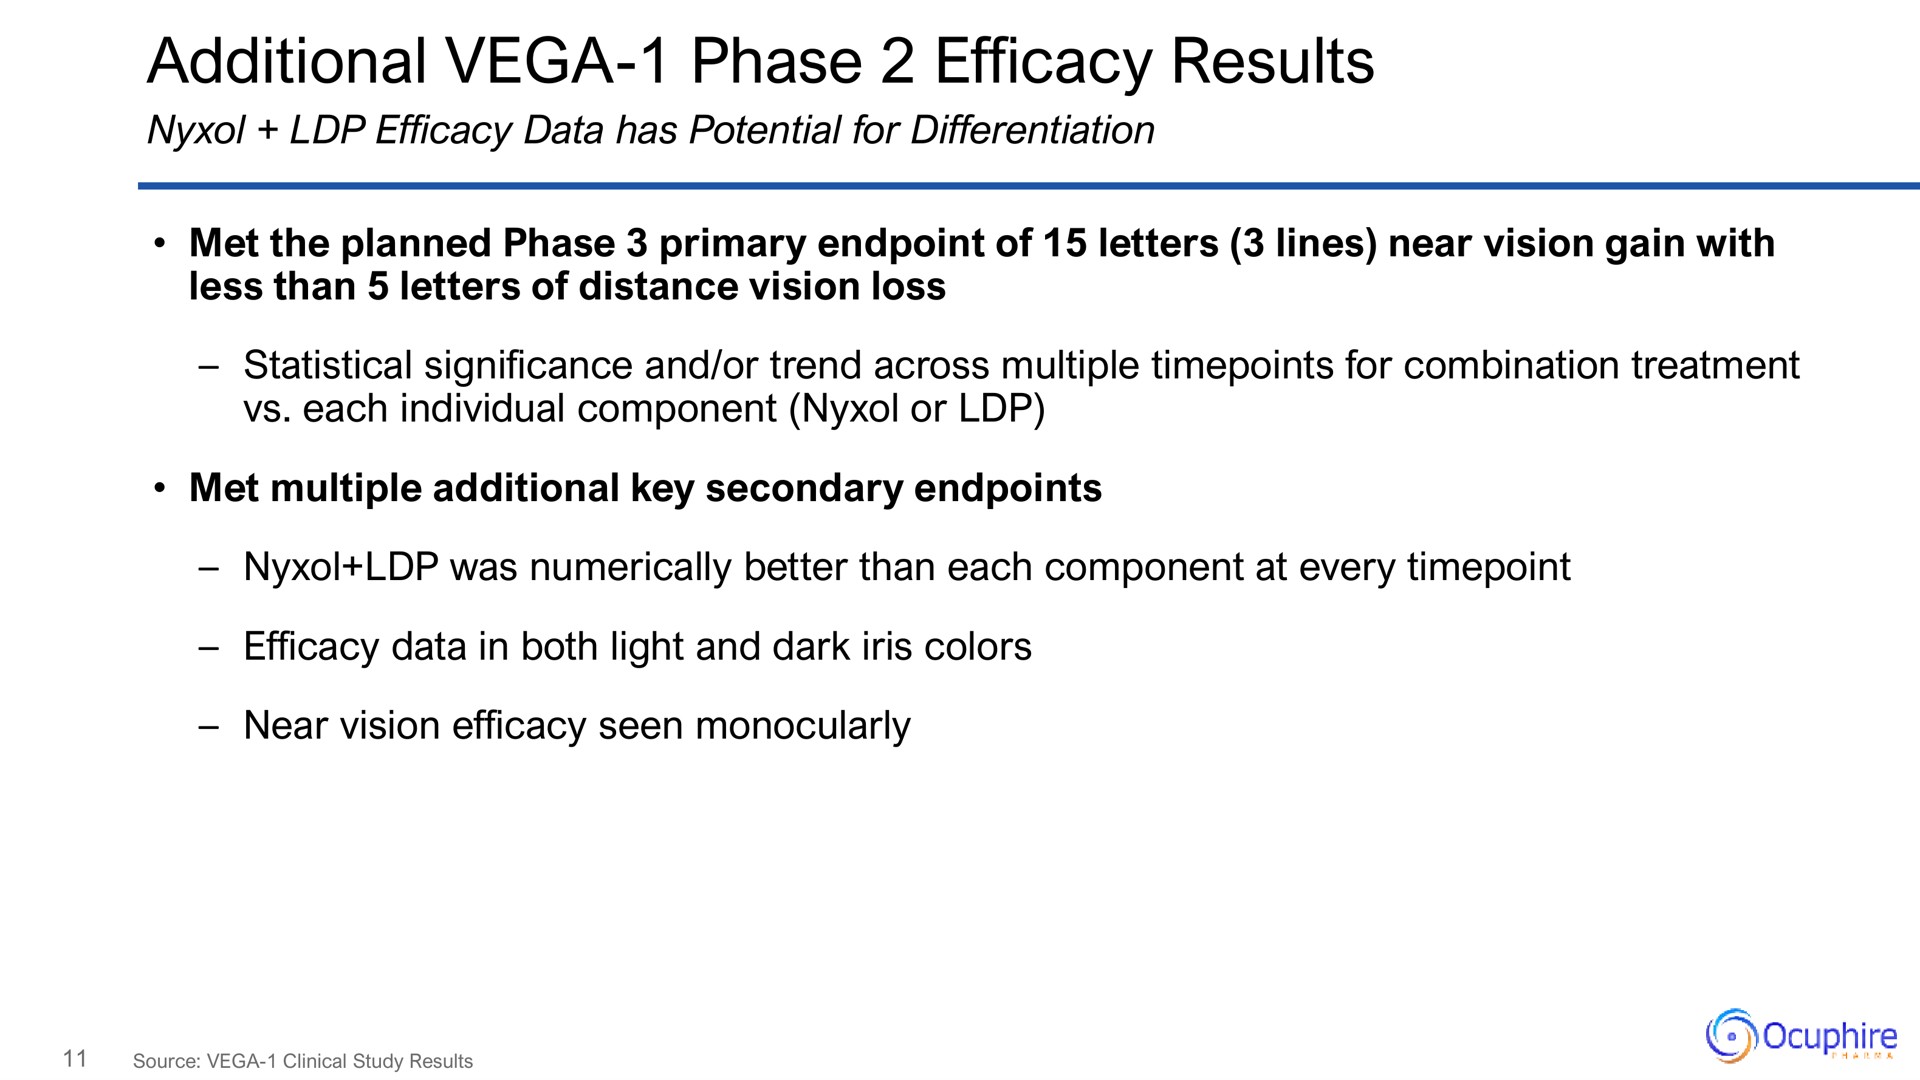 additional phase efficacy results | Ocuphire Pharma